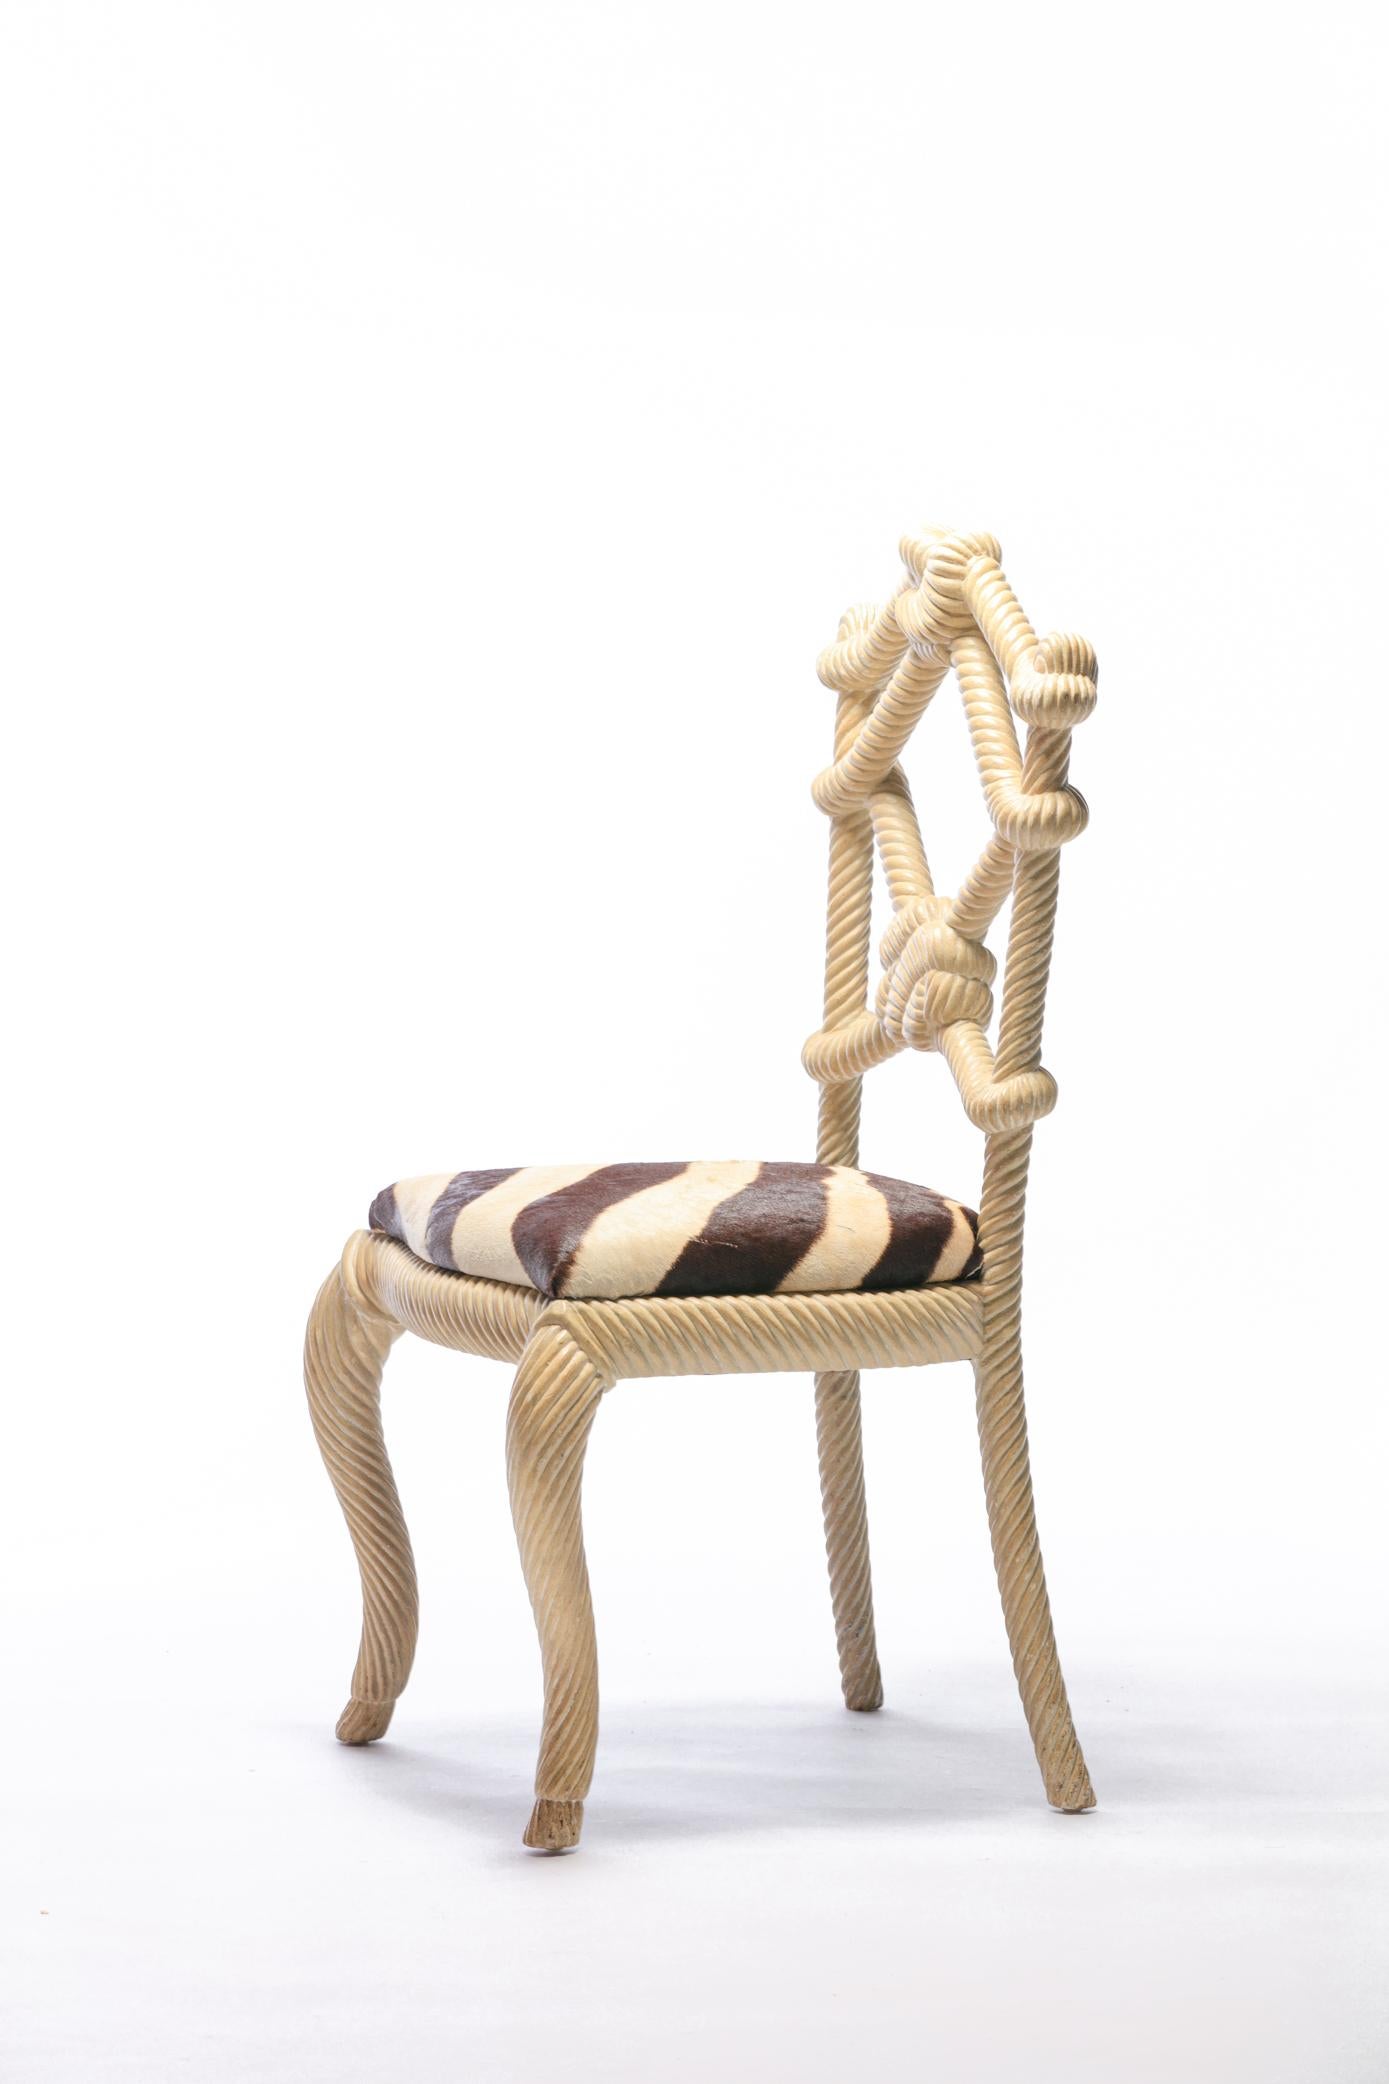 Carved Pair of Rope Chairs from Viceroy Miami with Zebra Hide Upholstered Seats For Sale